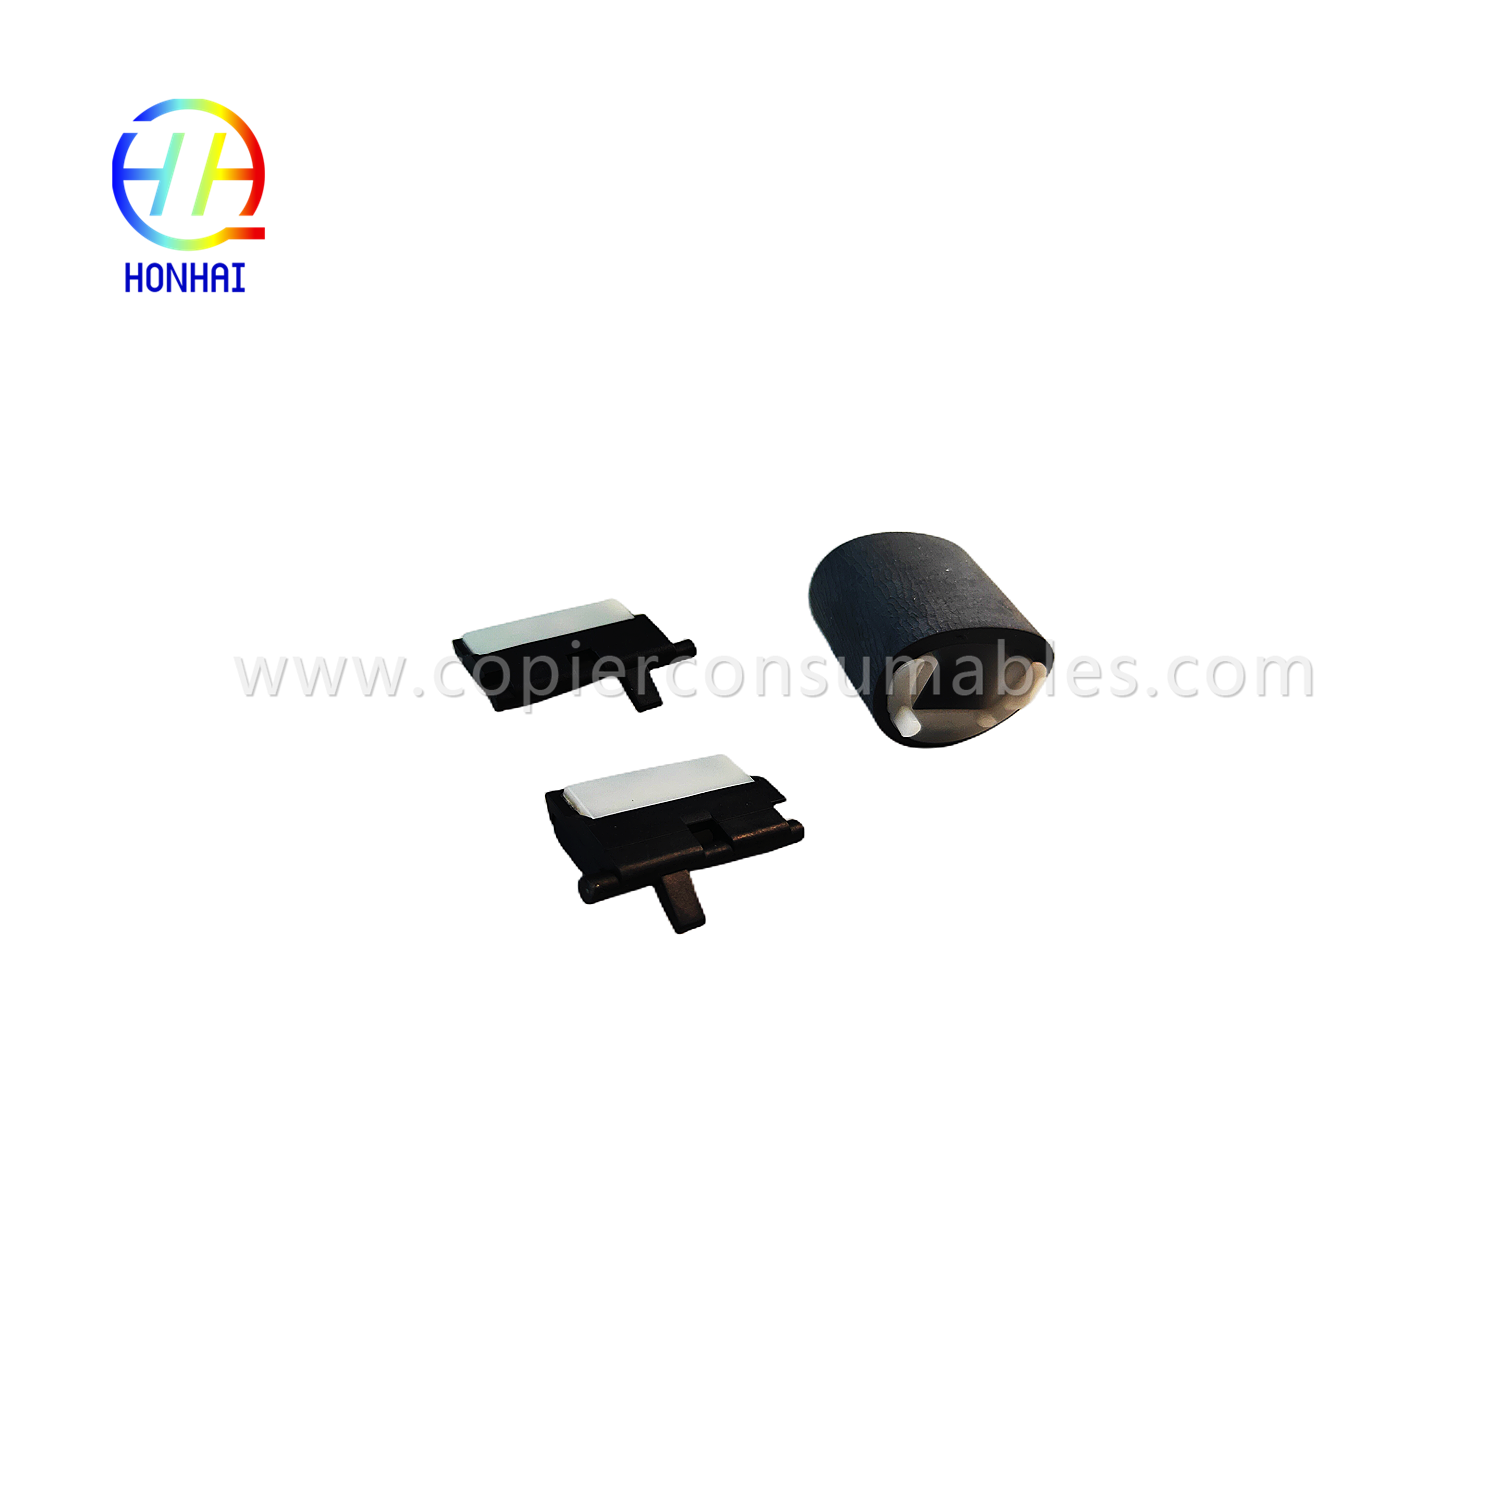 https://www.copierconsumables.com/paper-pickup-roller-separates-pad%ef%bc%88set%ef%bc%89for-hp-pagewide-x585z-x451dn-x476dn-x551dw-x576dw-556dn-586- 452dn-477dn-552-577z-cb780-60012-produk/